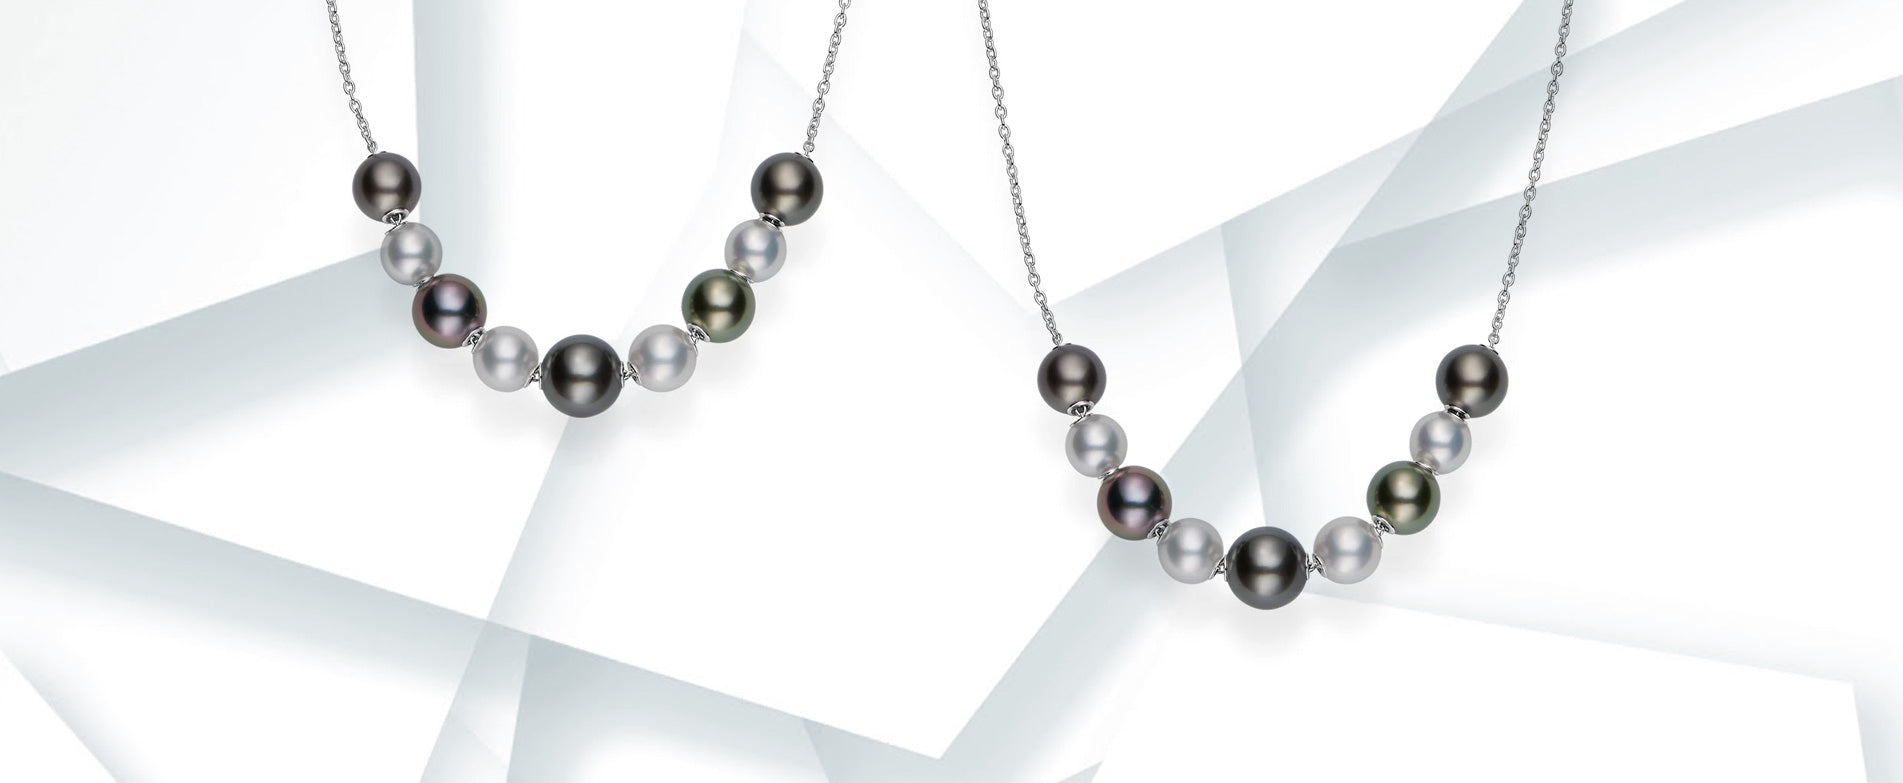 Mikimoto Pearls in Motion